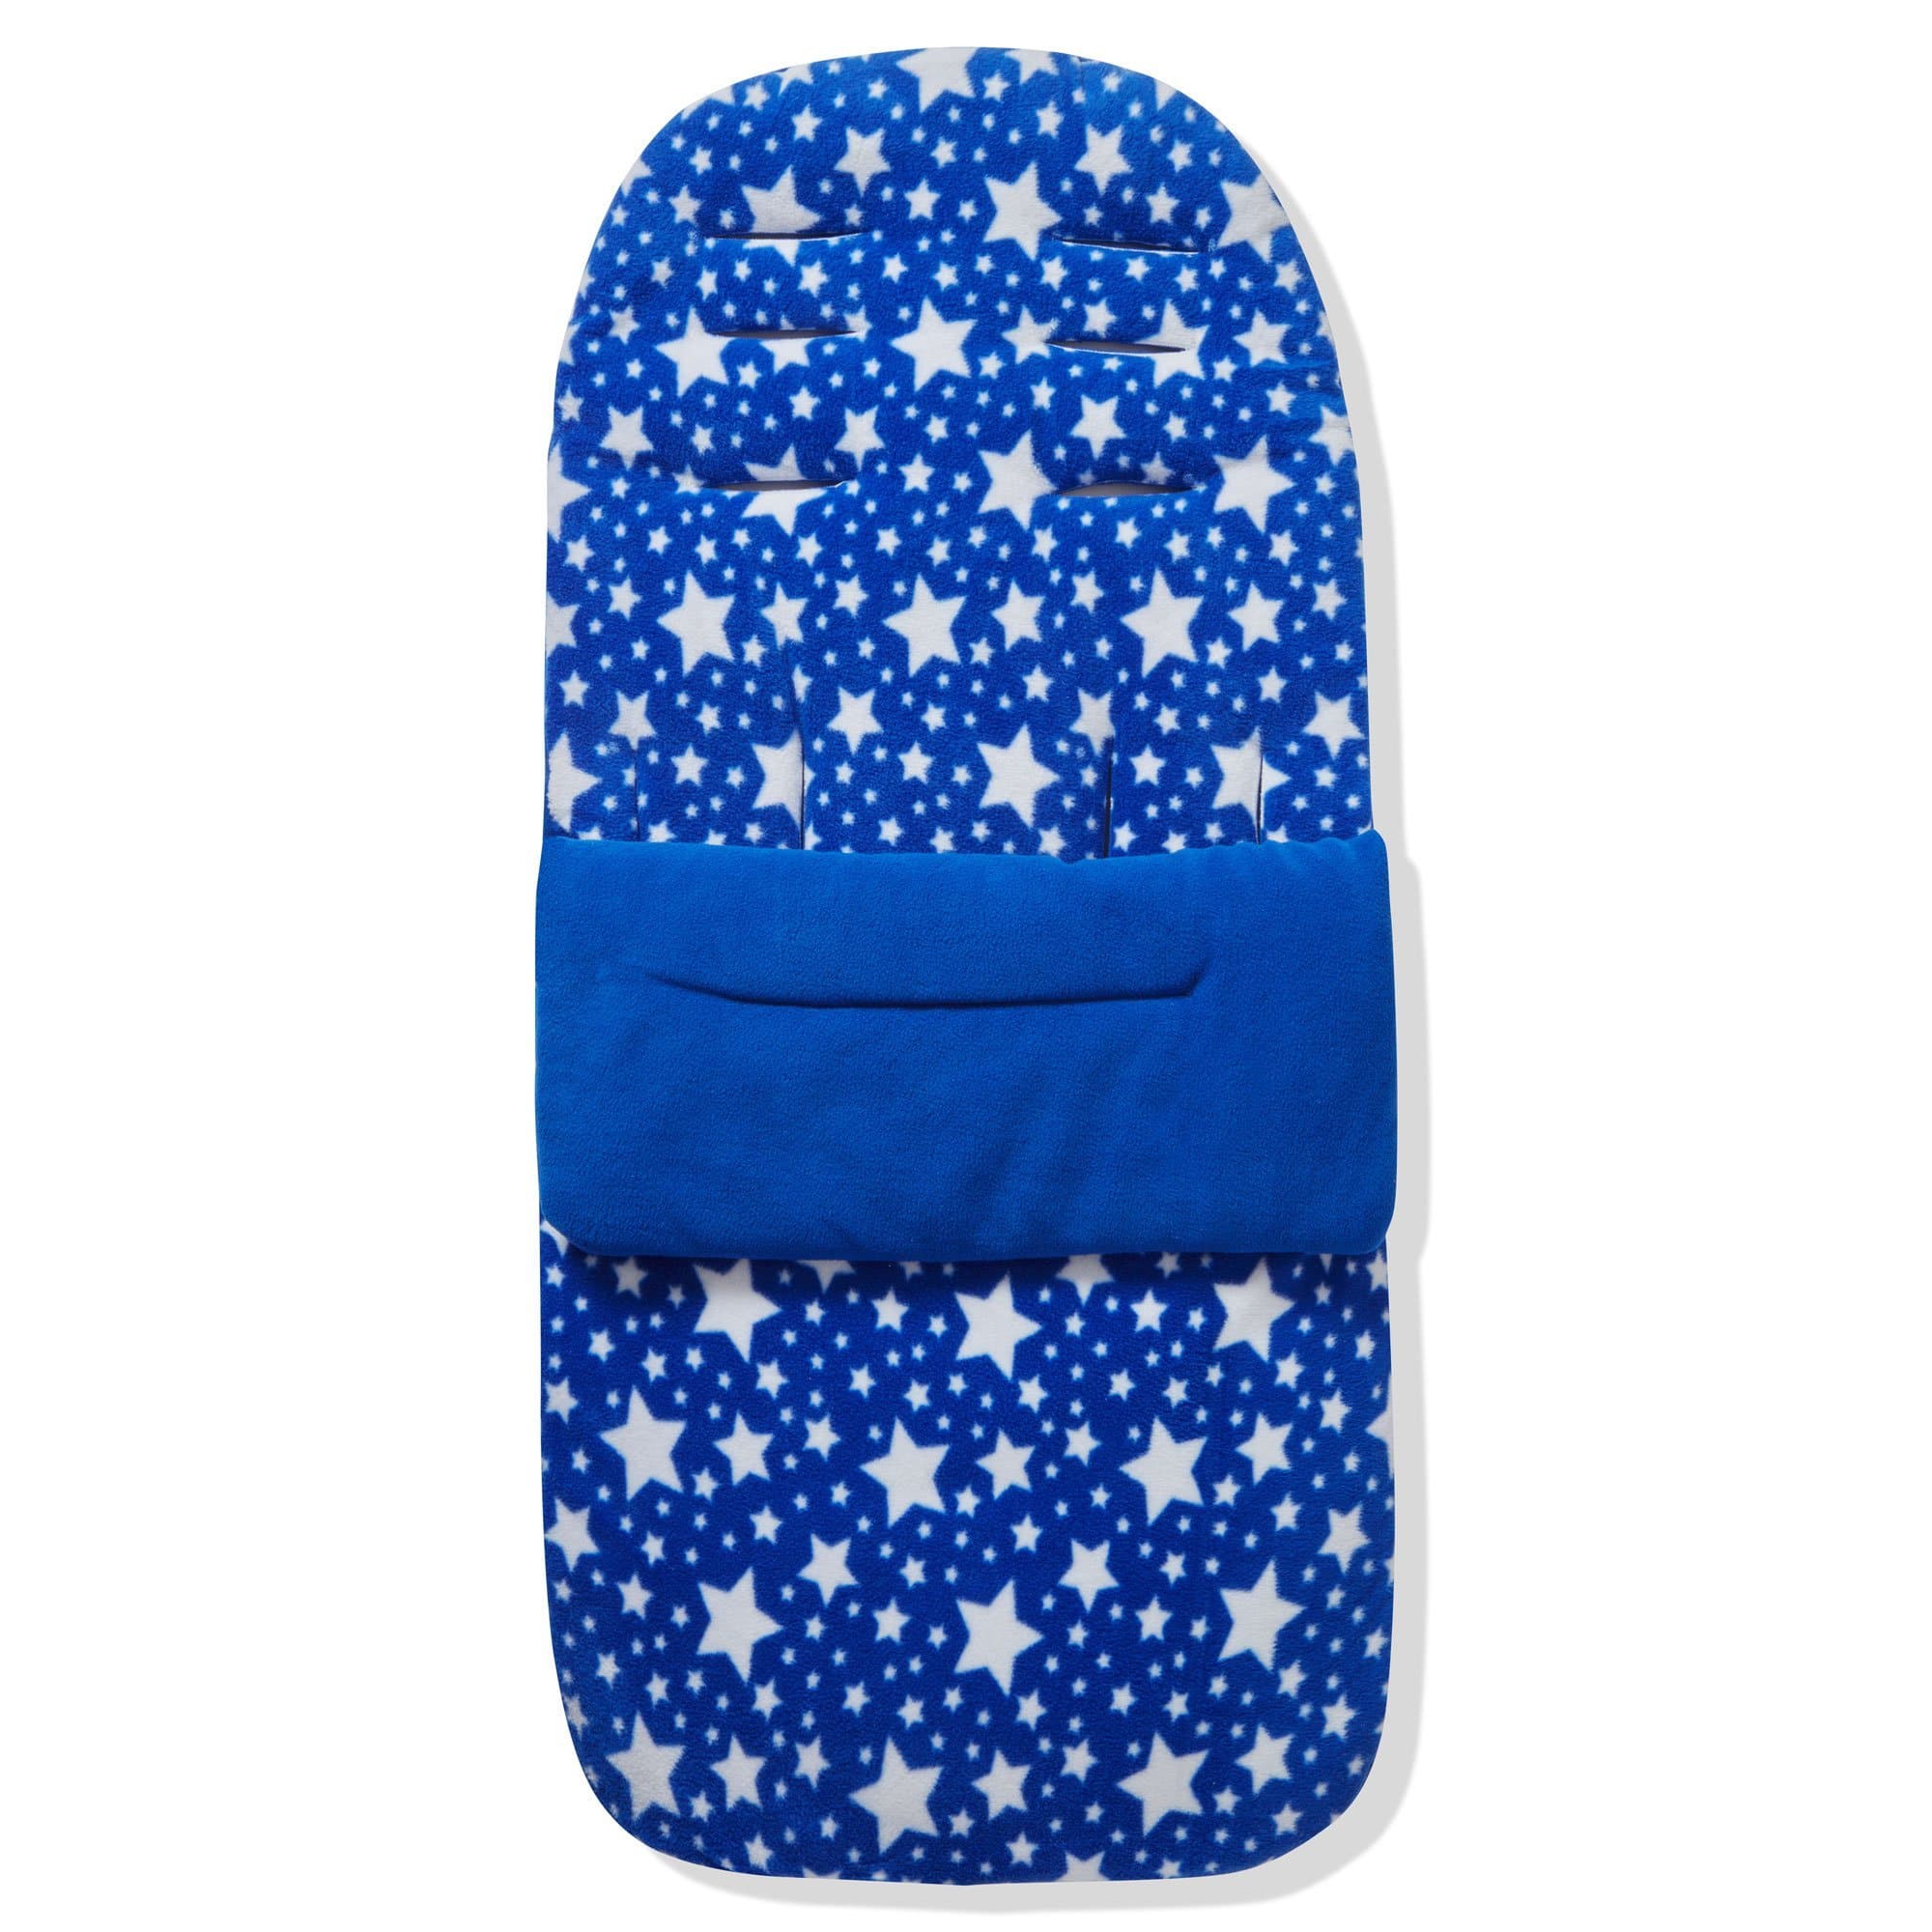 Fleece Footmuff / Cosy Toes Compatible with Kiddicare - Blue Star / Fits All Models | For Your Little One